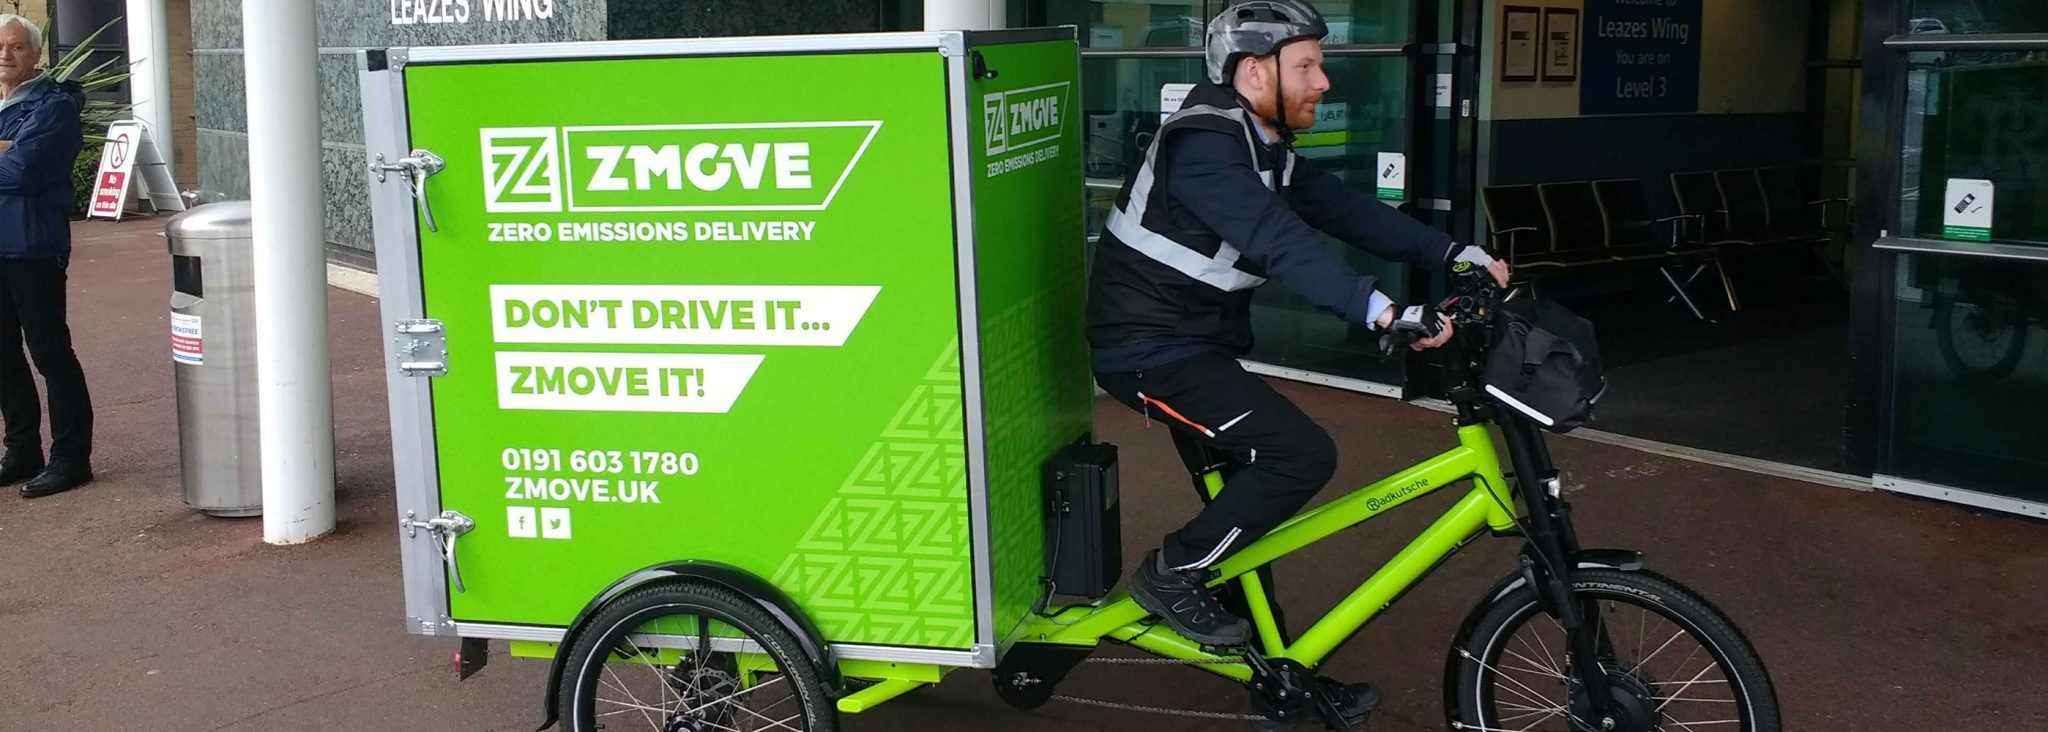 Zero emissions courier bike service featured image